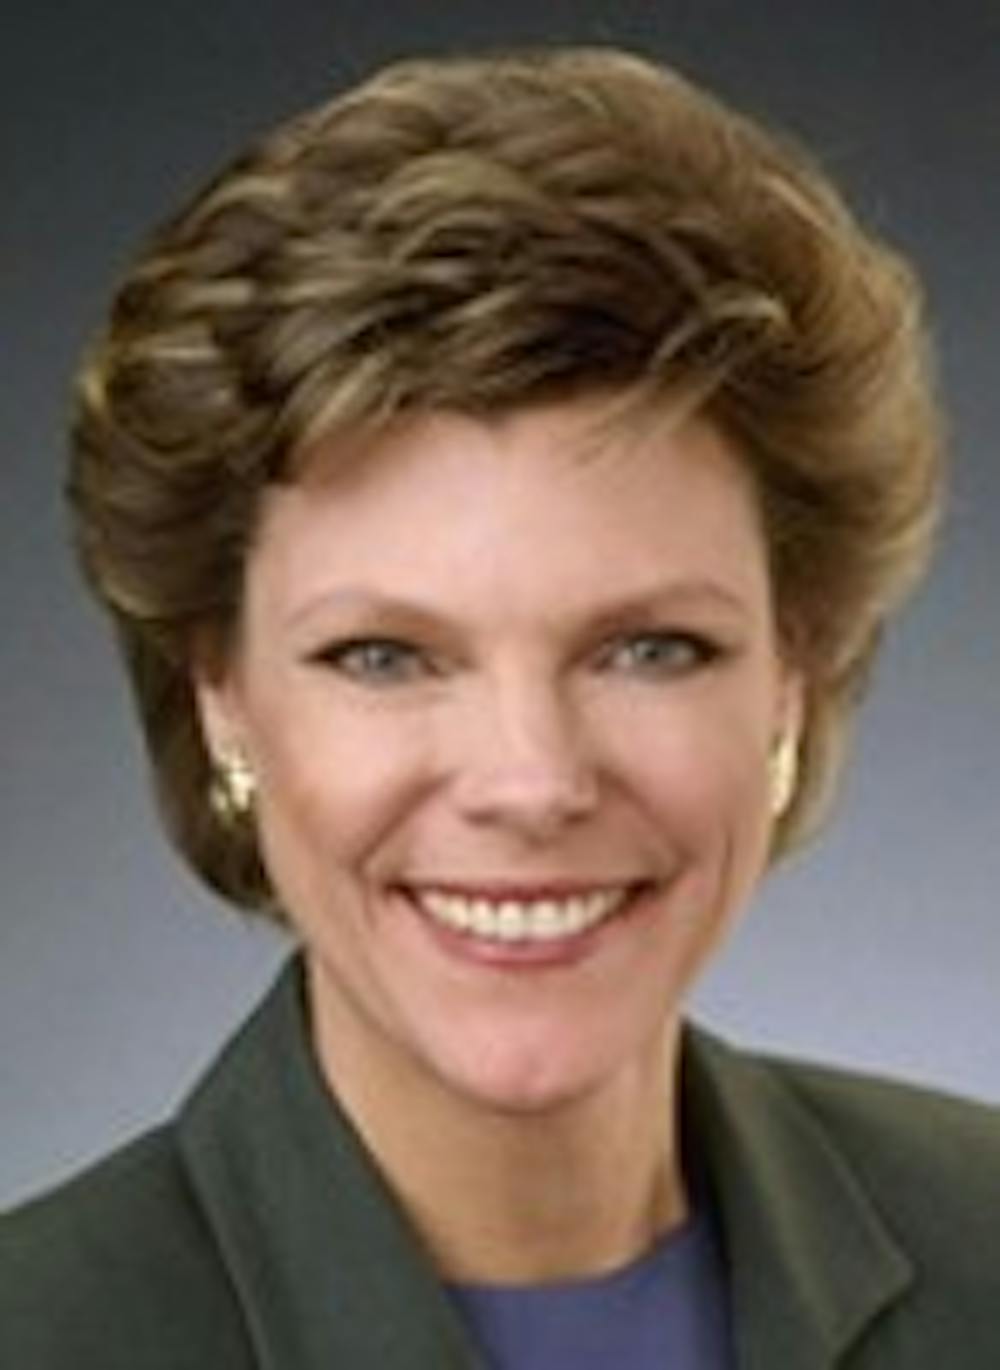 	Cokie Roberts is a political commentator for ABC News. She spoke Monday at UNC about politics.